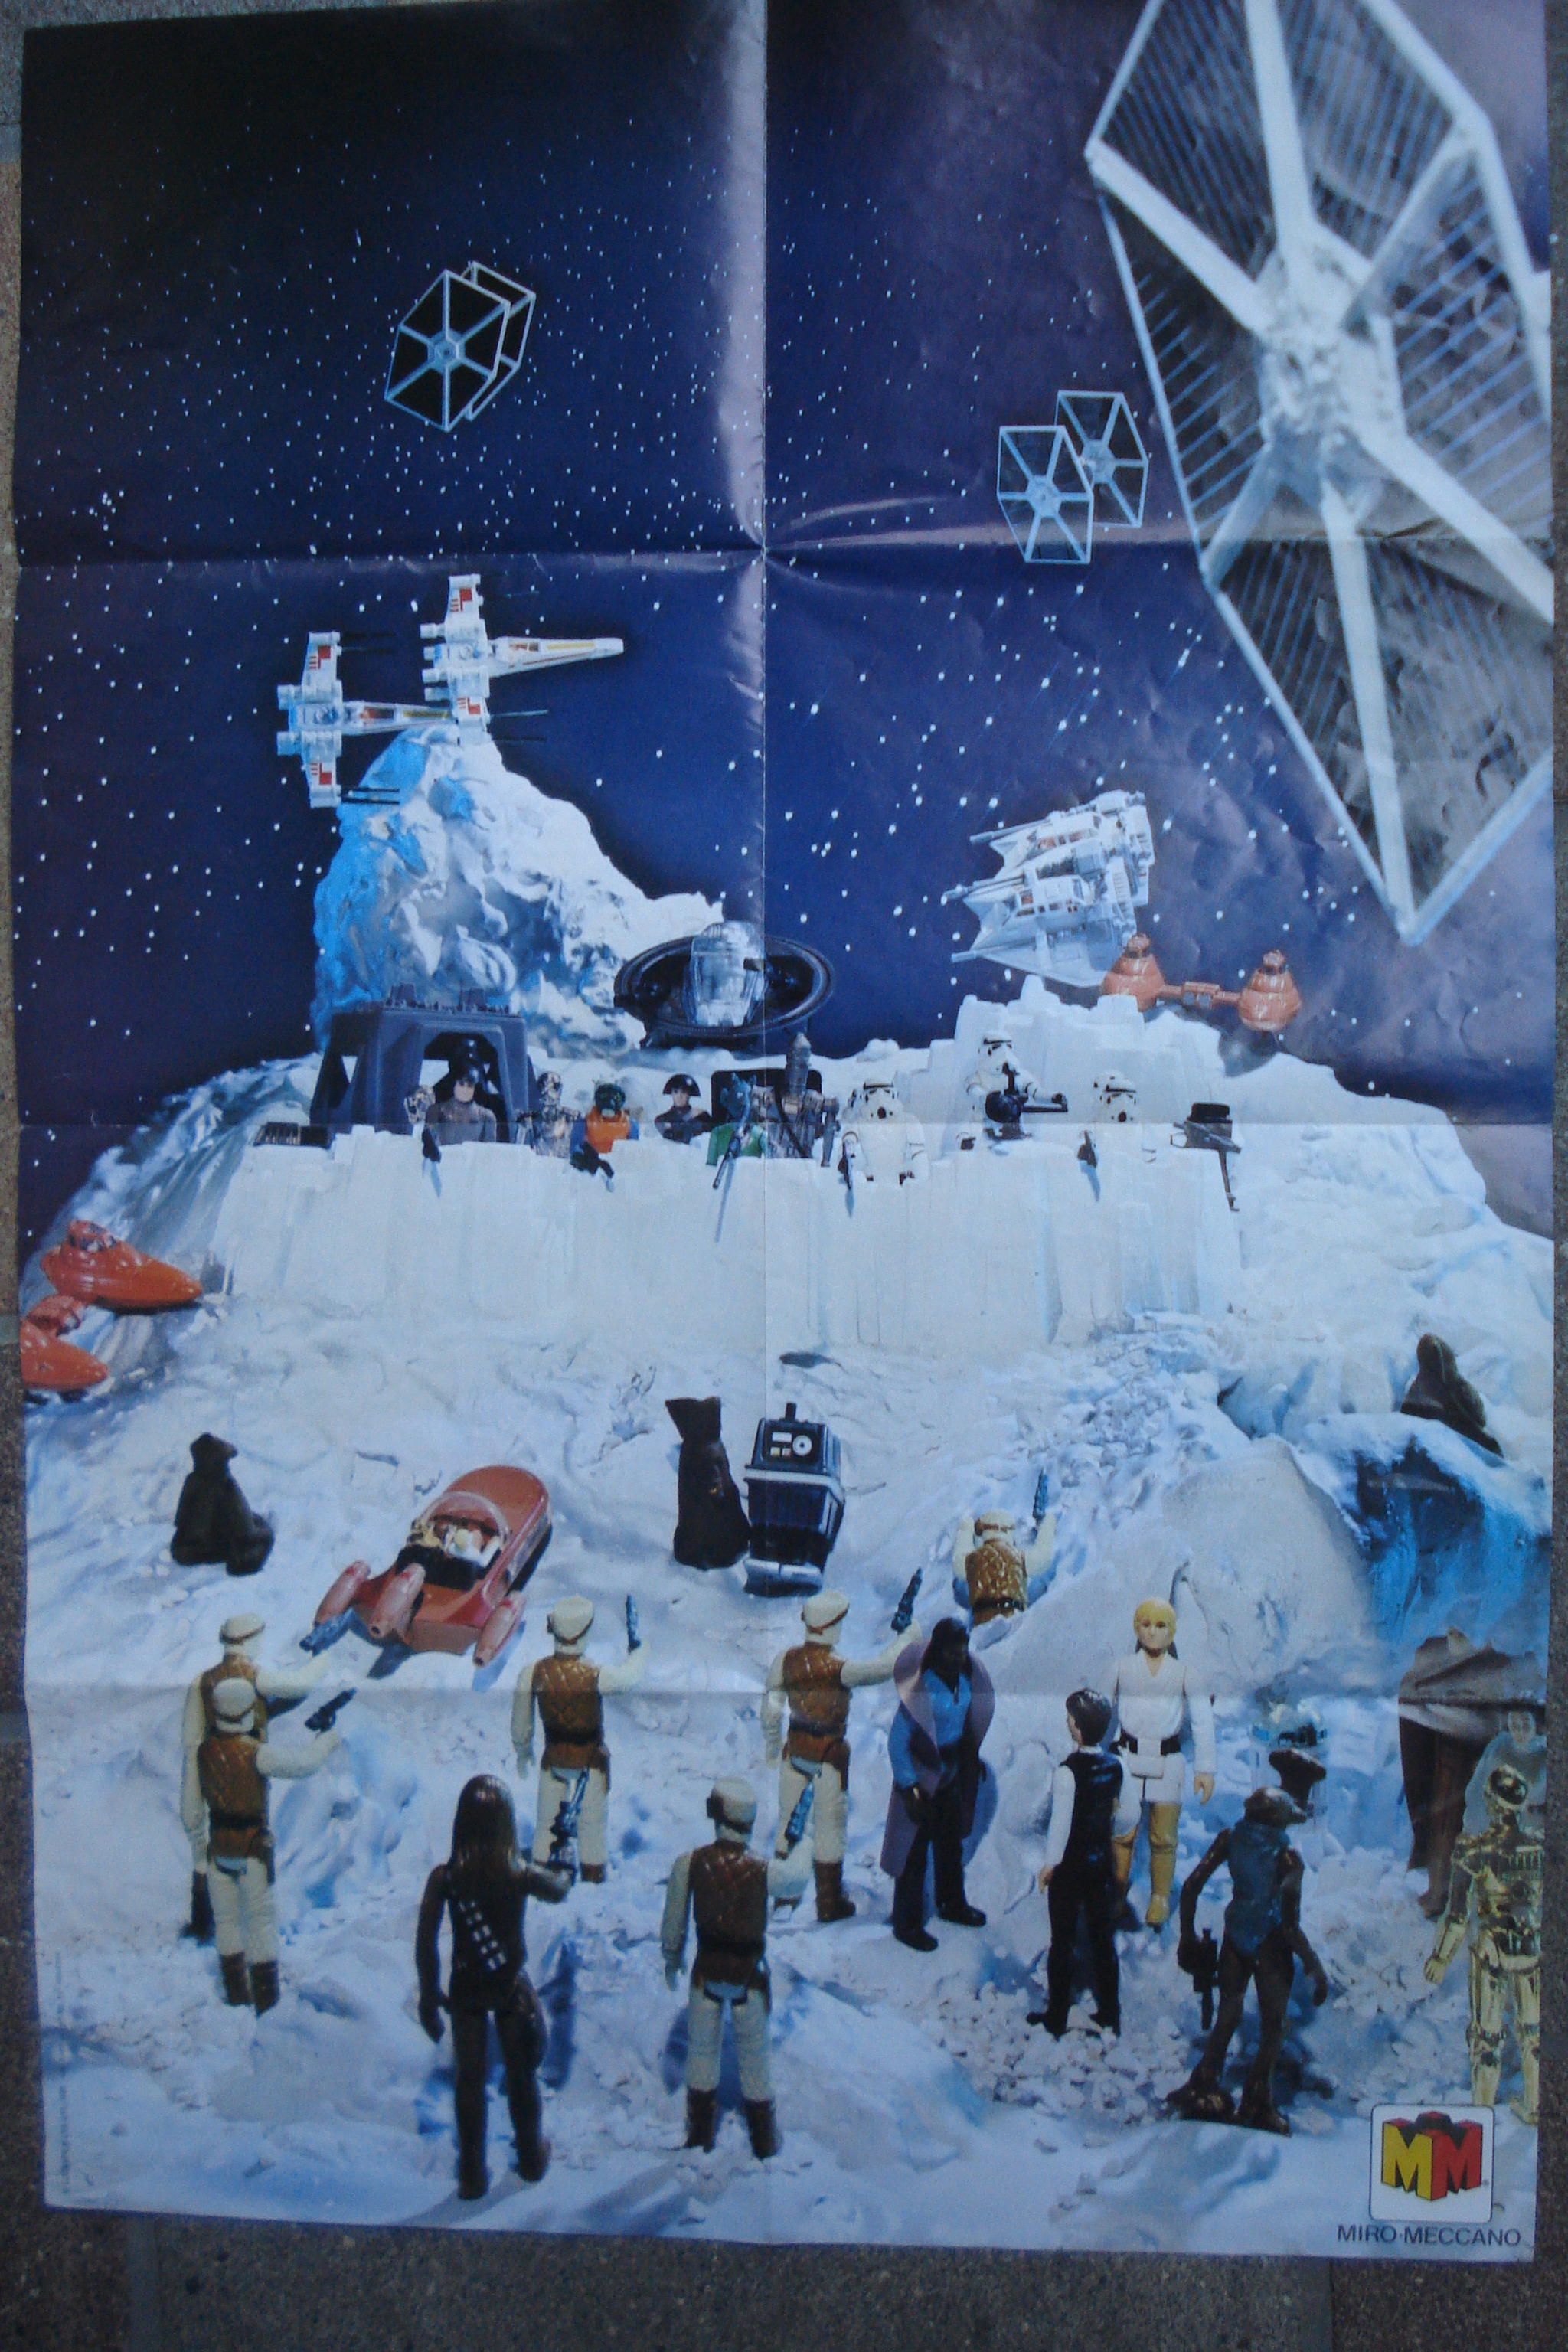 Collecting Vintage Paper Work that show Vintage Star Wars Toys! - Page 8 Www.tvn.hu_3026e5ca9610510a19356b107622220e